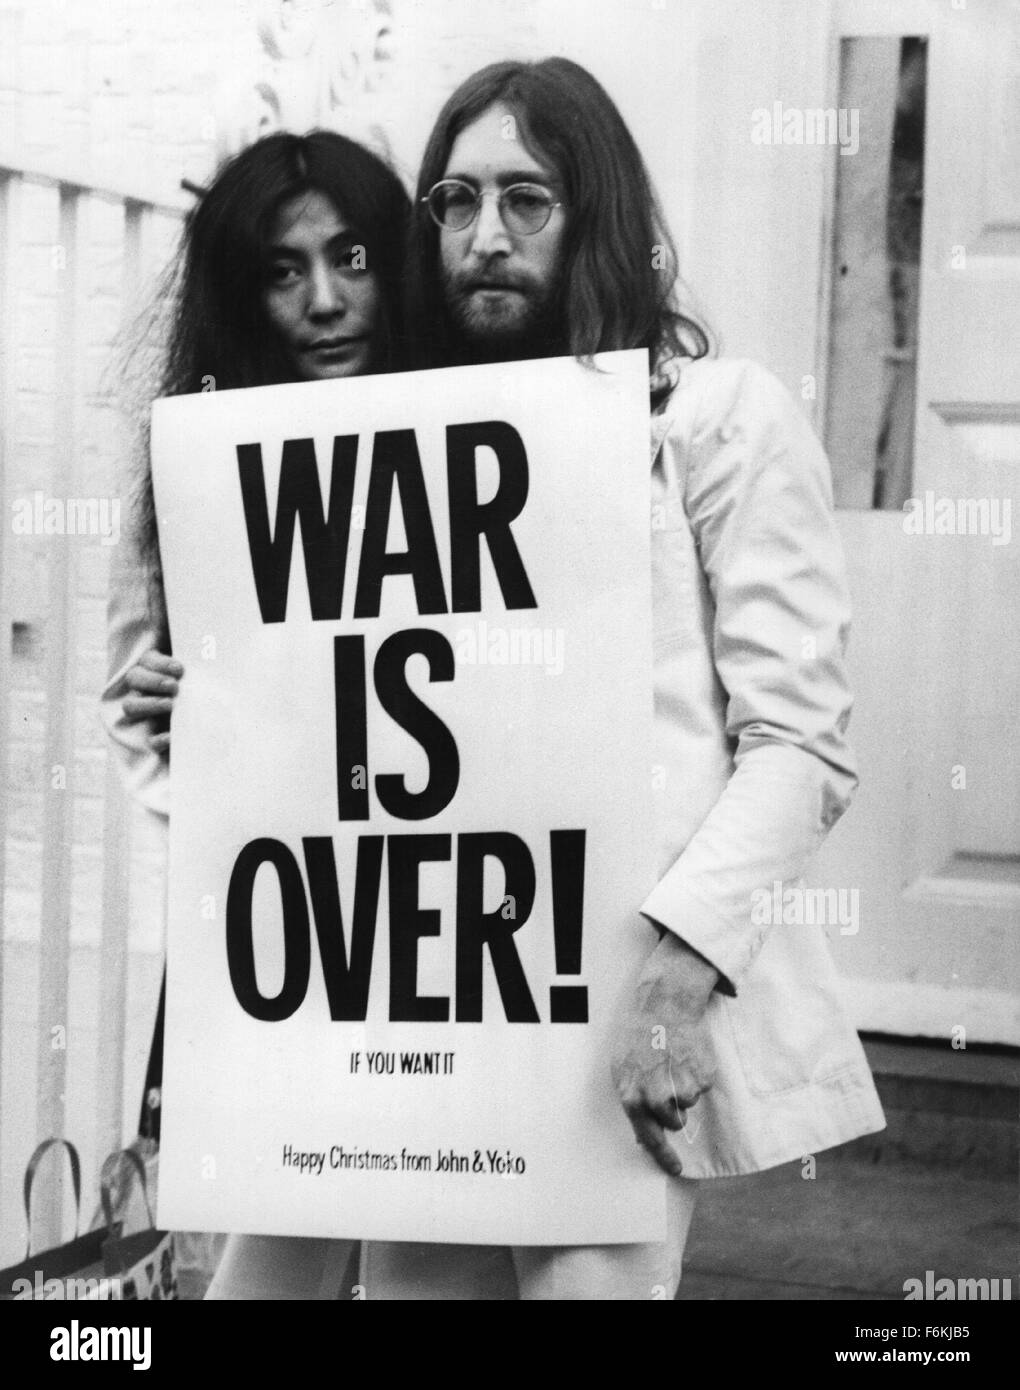 RELEASE DATE: September 1, 2006. MOVIE TITLE: The U.S. vs. John Lennon. STUDIO: Lions Gate Films. PLOT: A documentary on the life of John Lennon, with a focus on the time in his life when he transformed from a musician into an antiwar activist. PICTURED: YOKO ONO and JOHN LENNON. Stock Photo